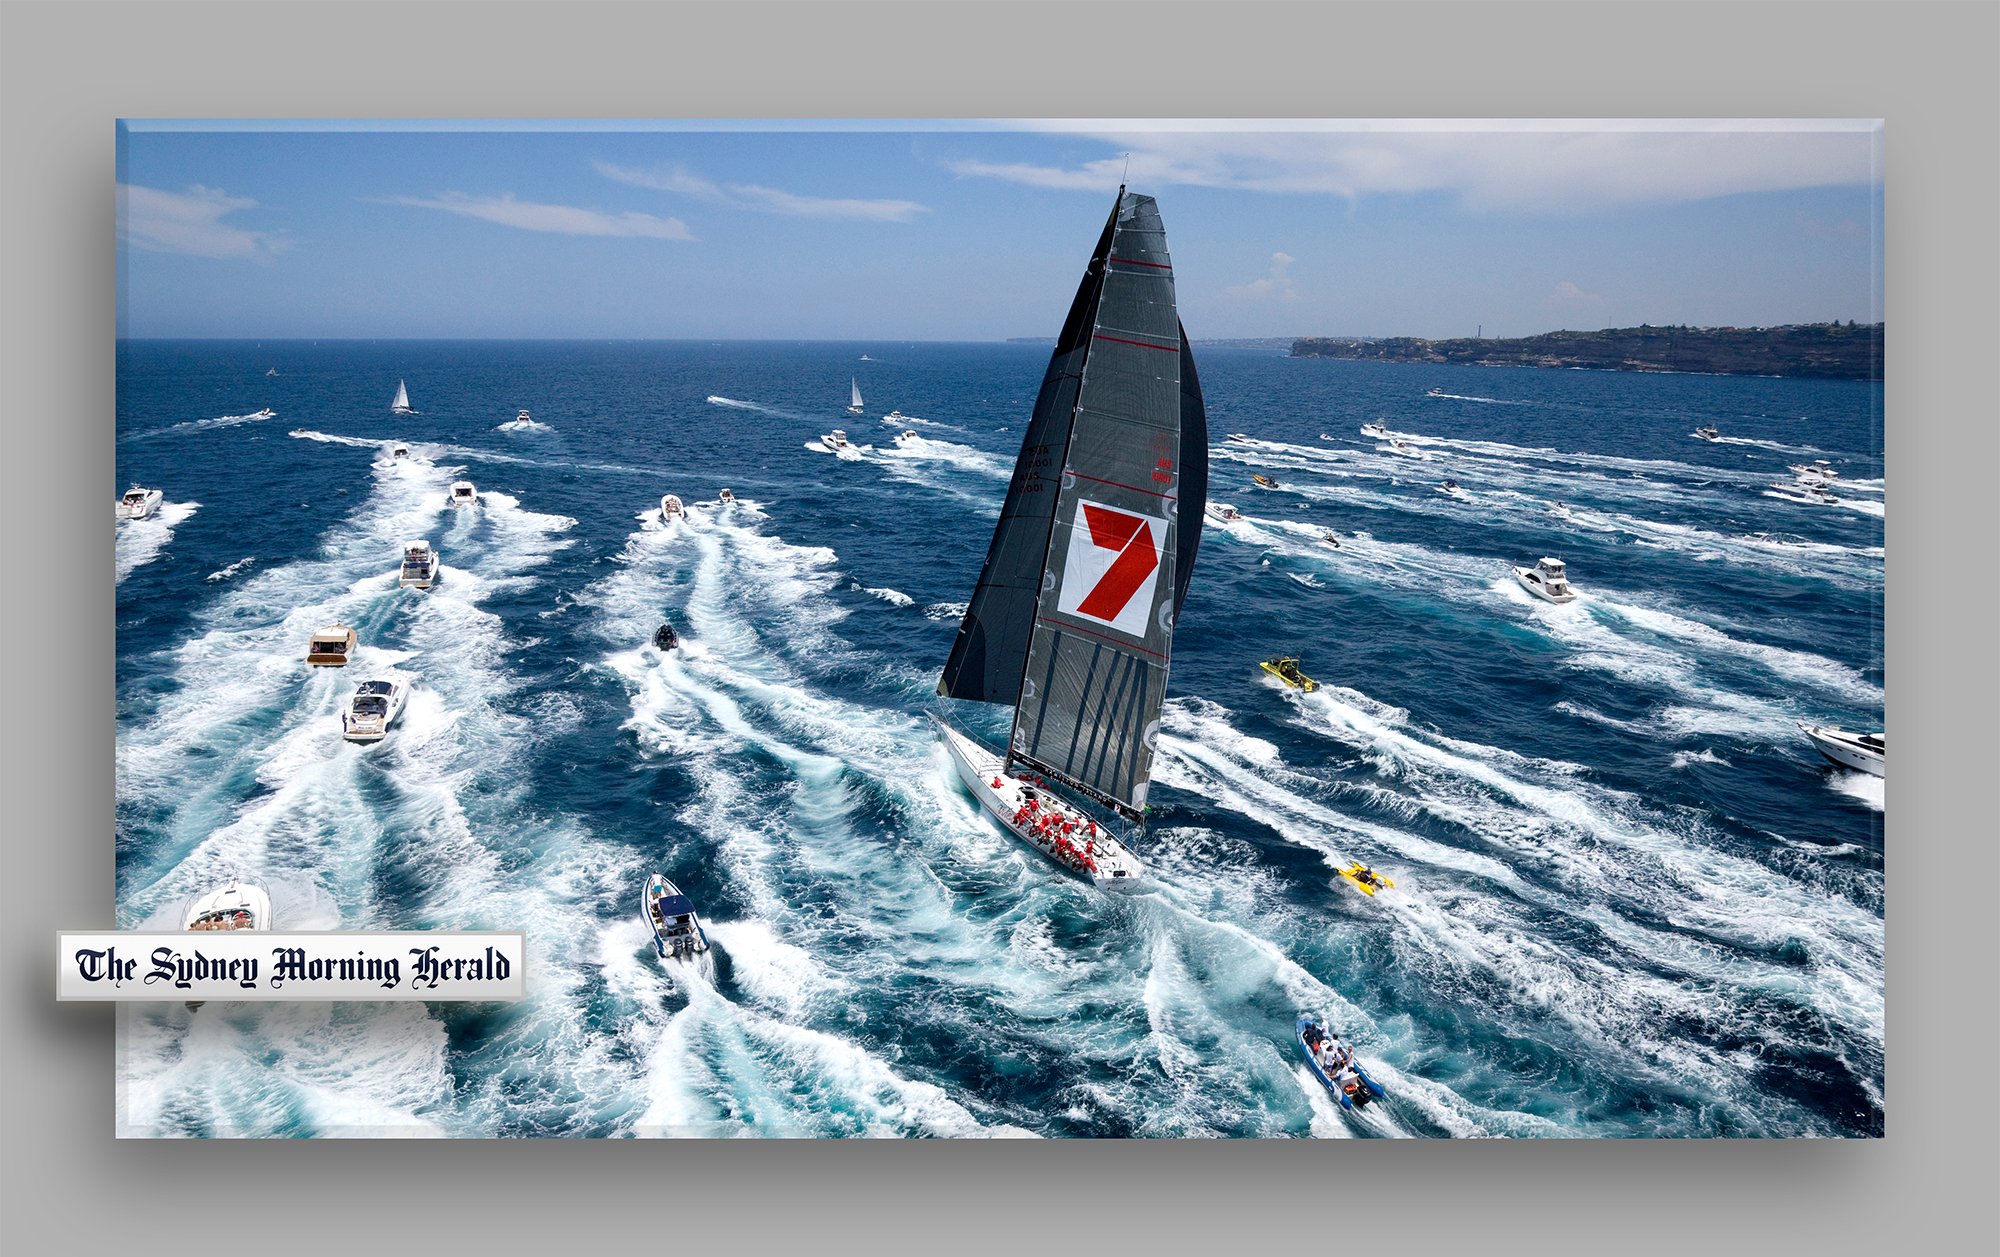 Wild Oats in the Rolex Sydney to Hobart yacht race